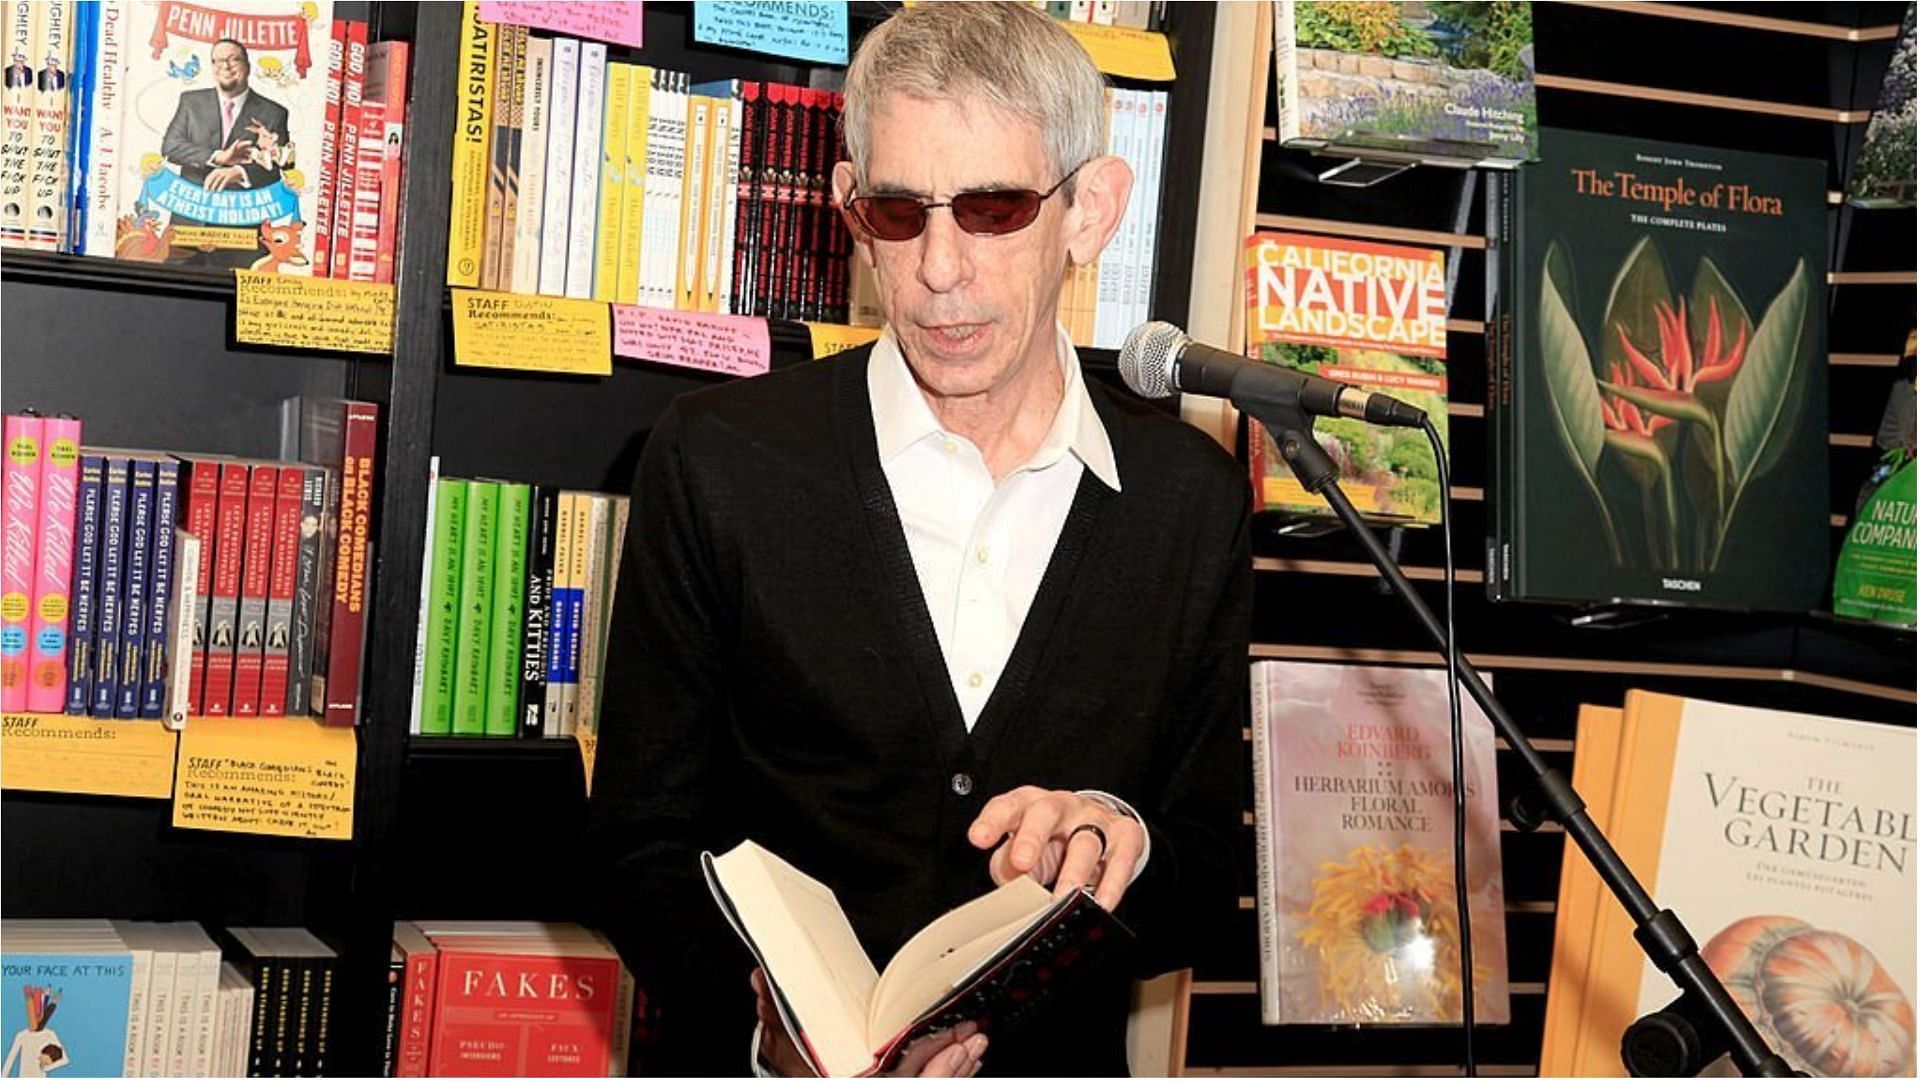 Richard Belzer appeared in various films and TV shows (Image via Rodrigo Vaz/Getty Images)